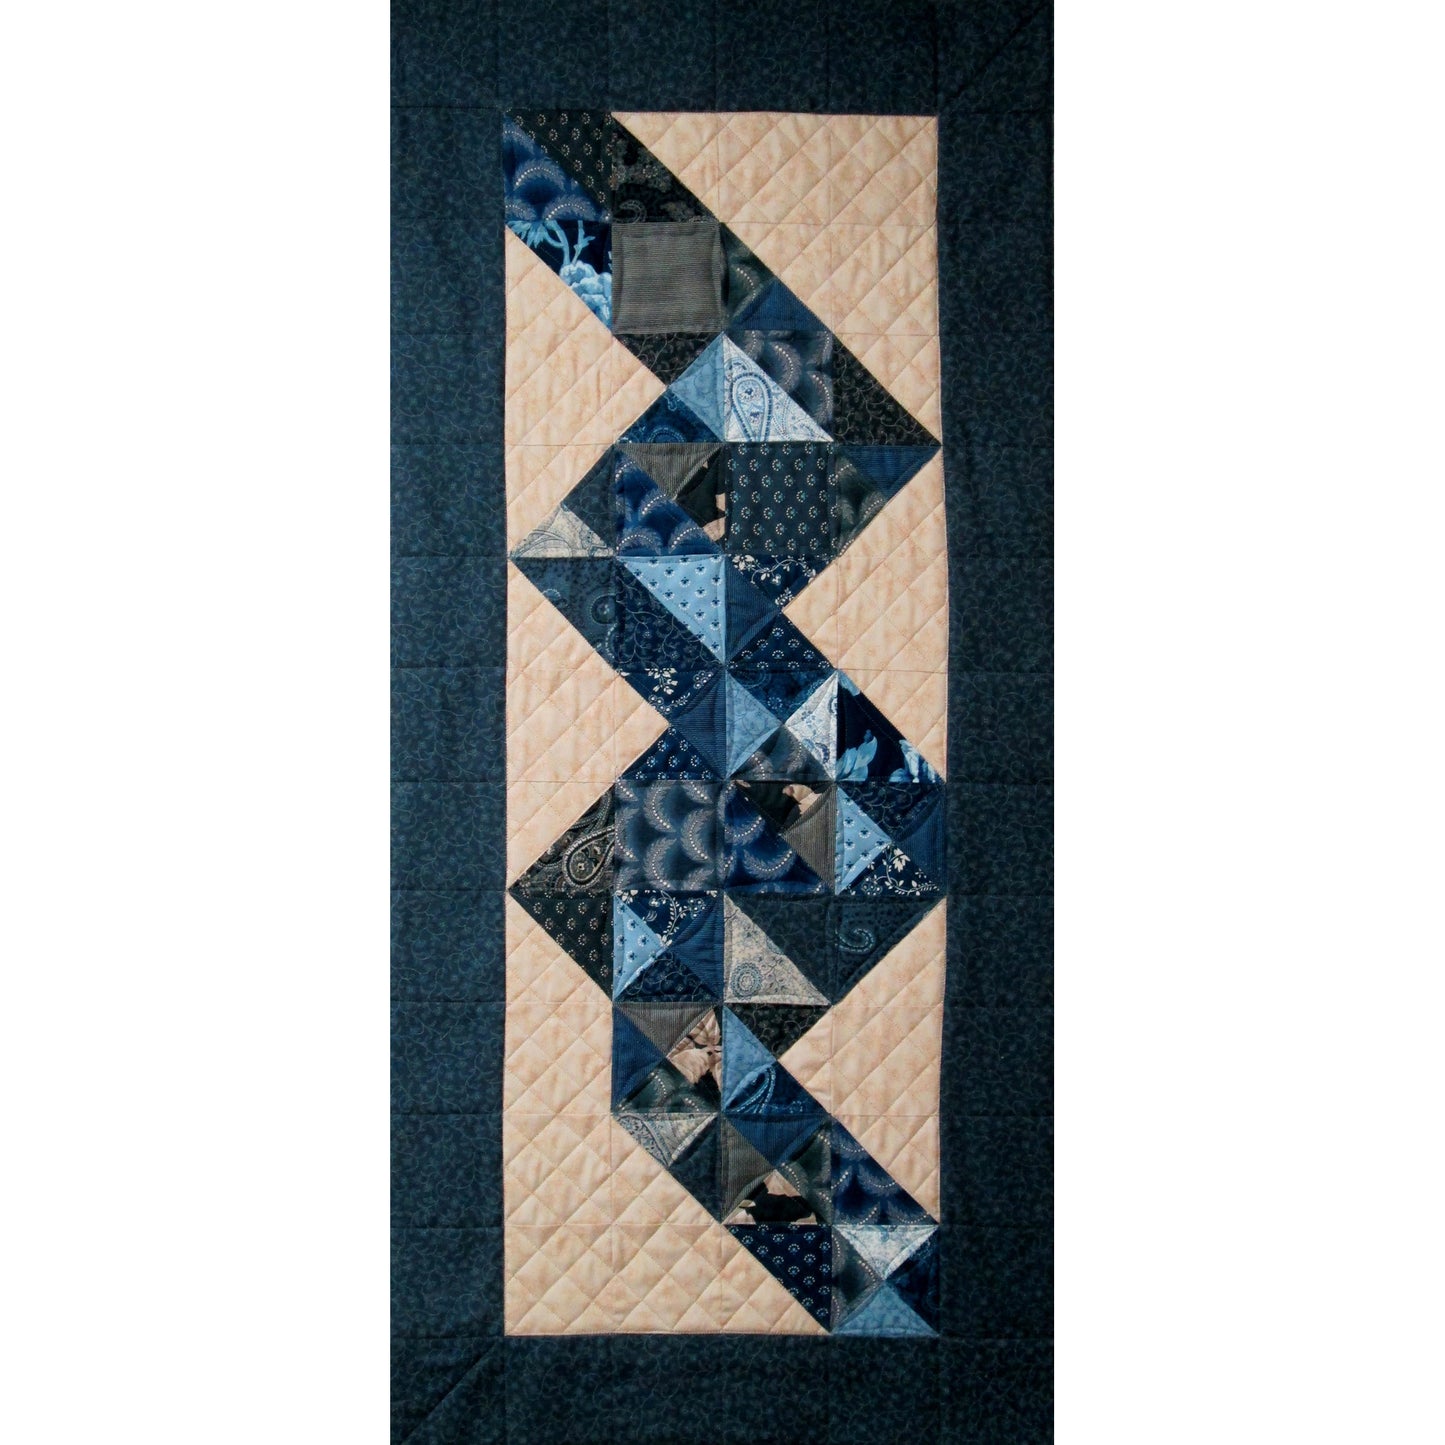 Vibrant table runner featuring colorful squares in shades of blue with a dark blue border.